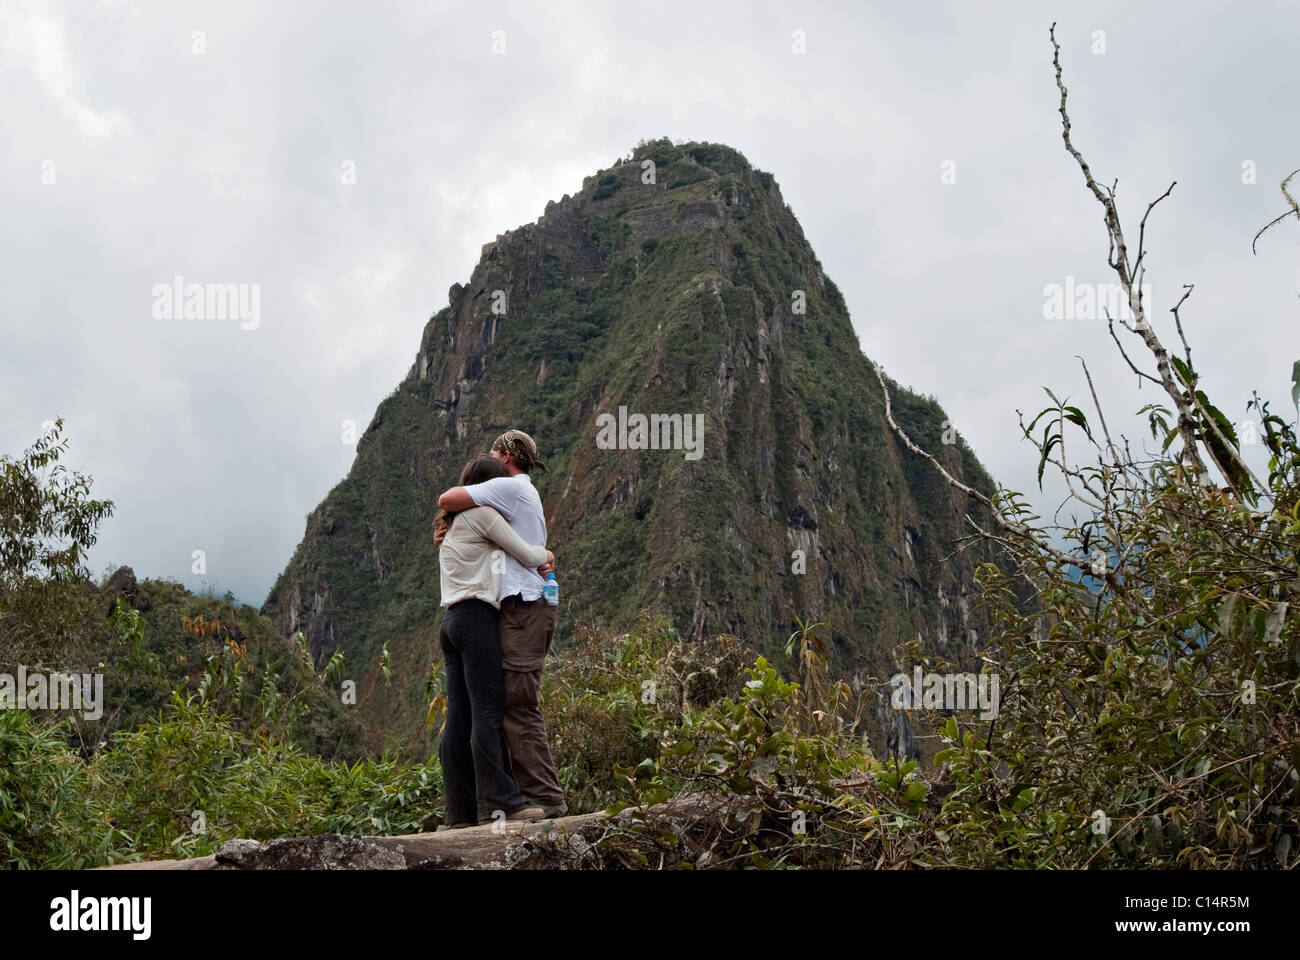 A young man asks for a young woman's hand in marriage in the ruins of Machu Picchu. Stock Photo